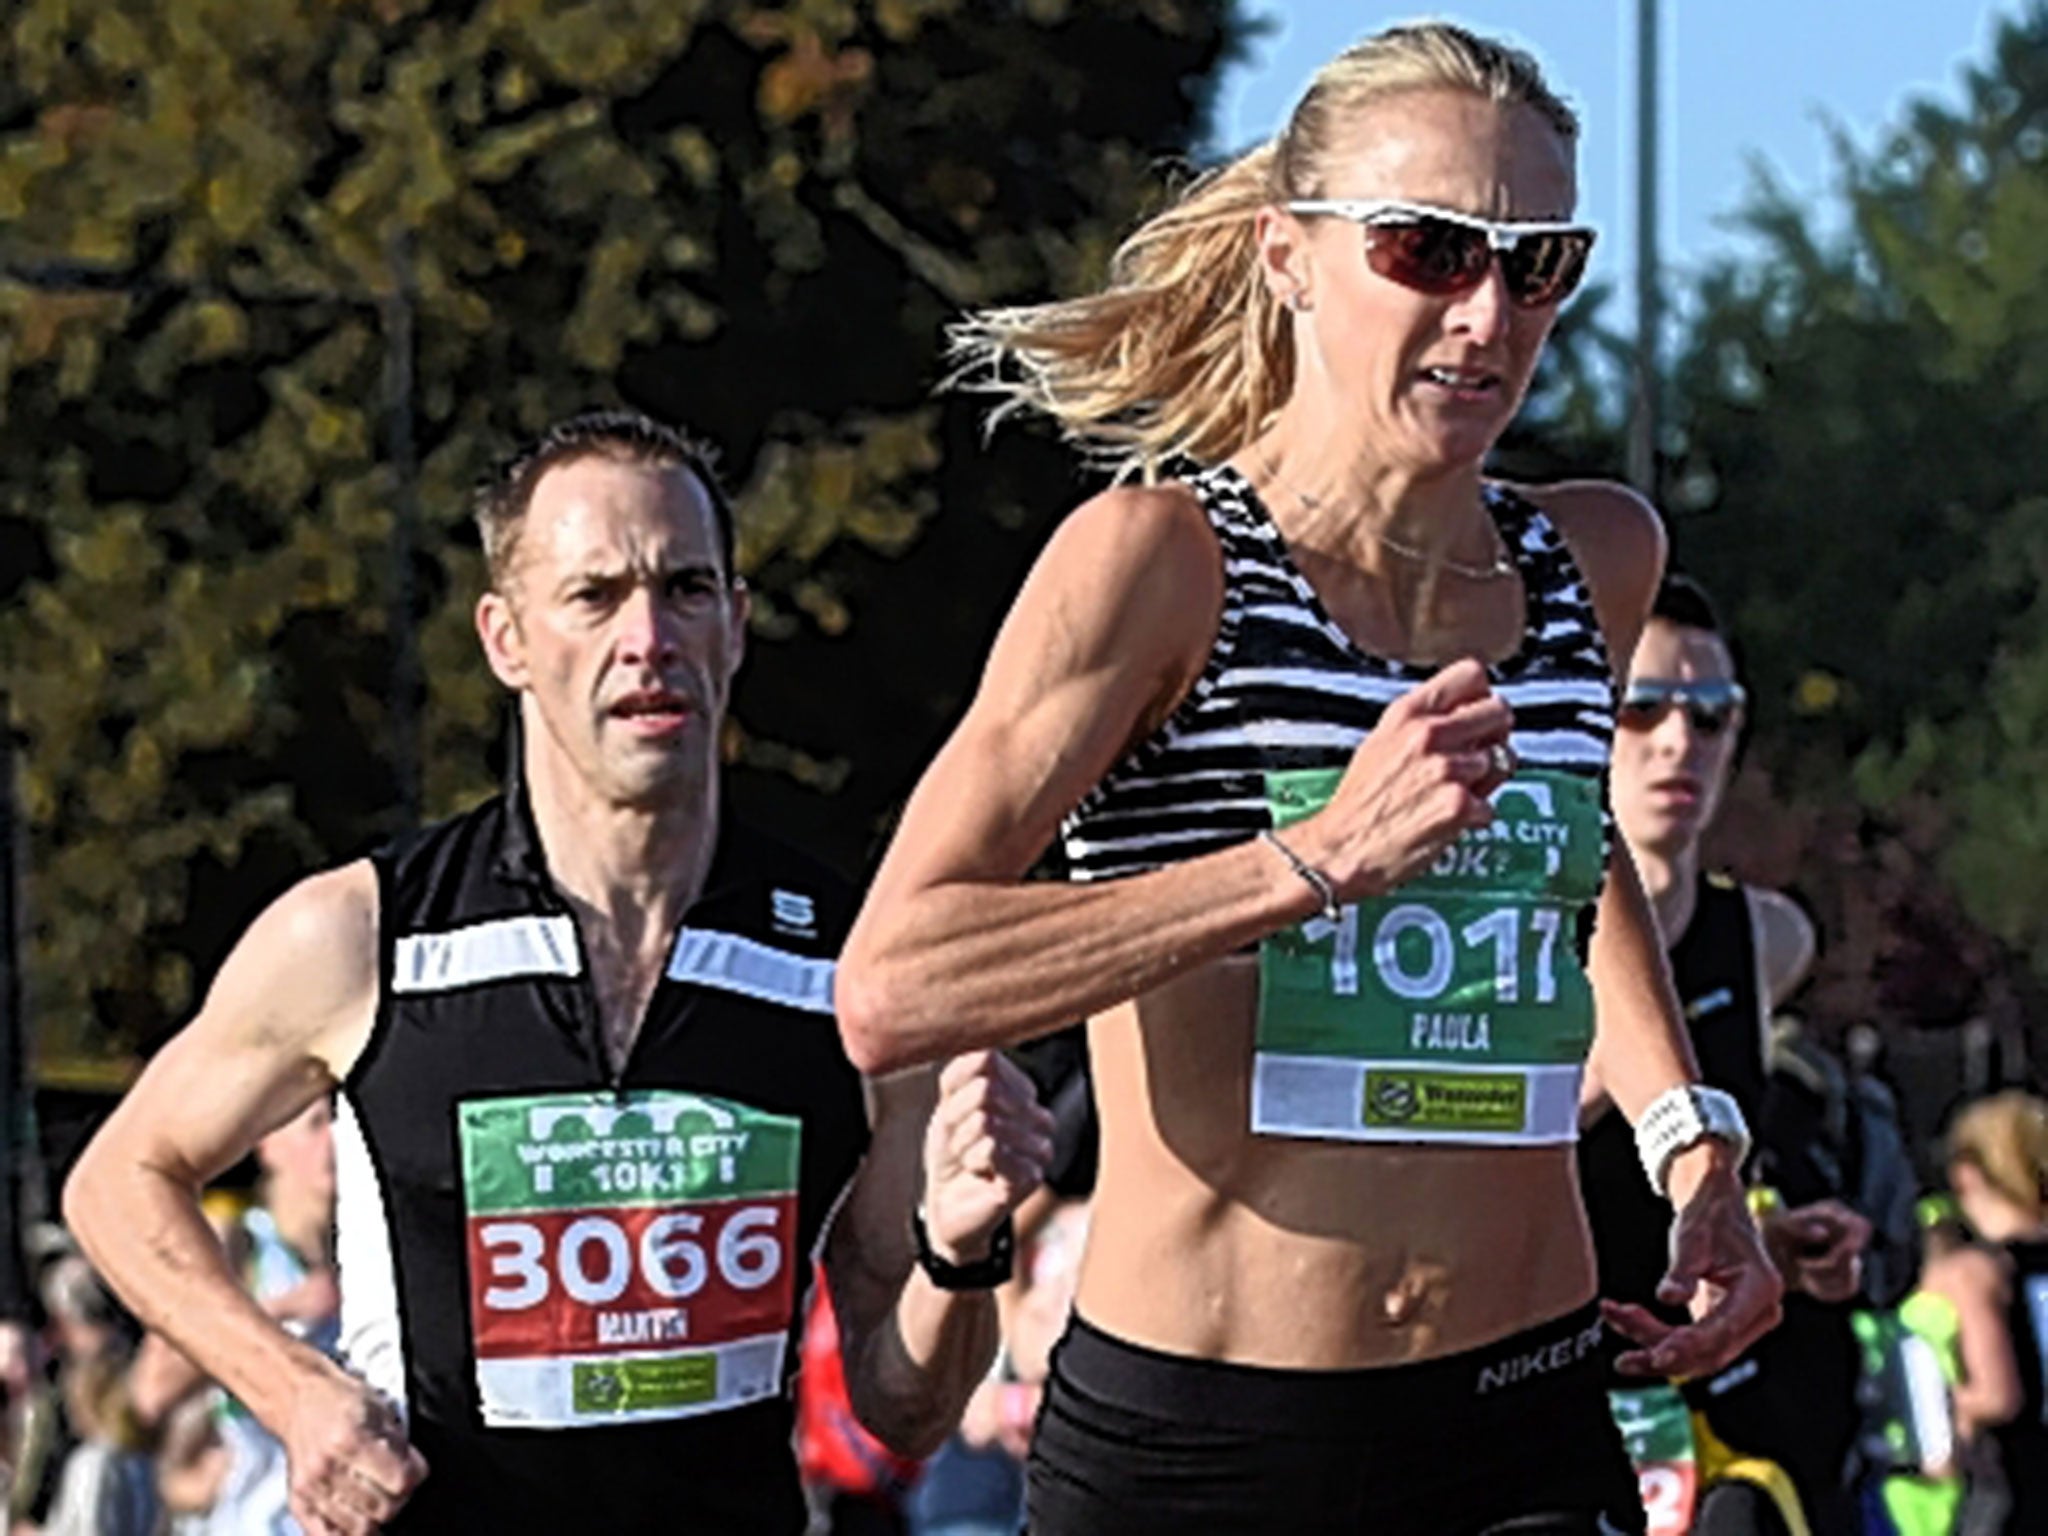 Paula Radcliffe on her way to a third place finish in the Worcester City 10k run on Sunday